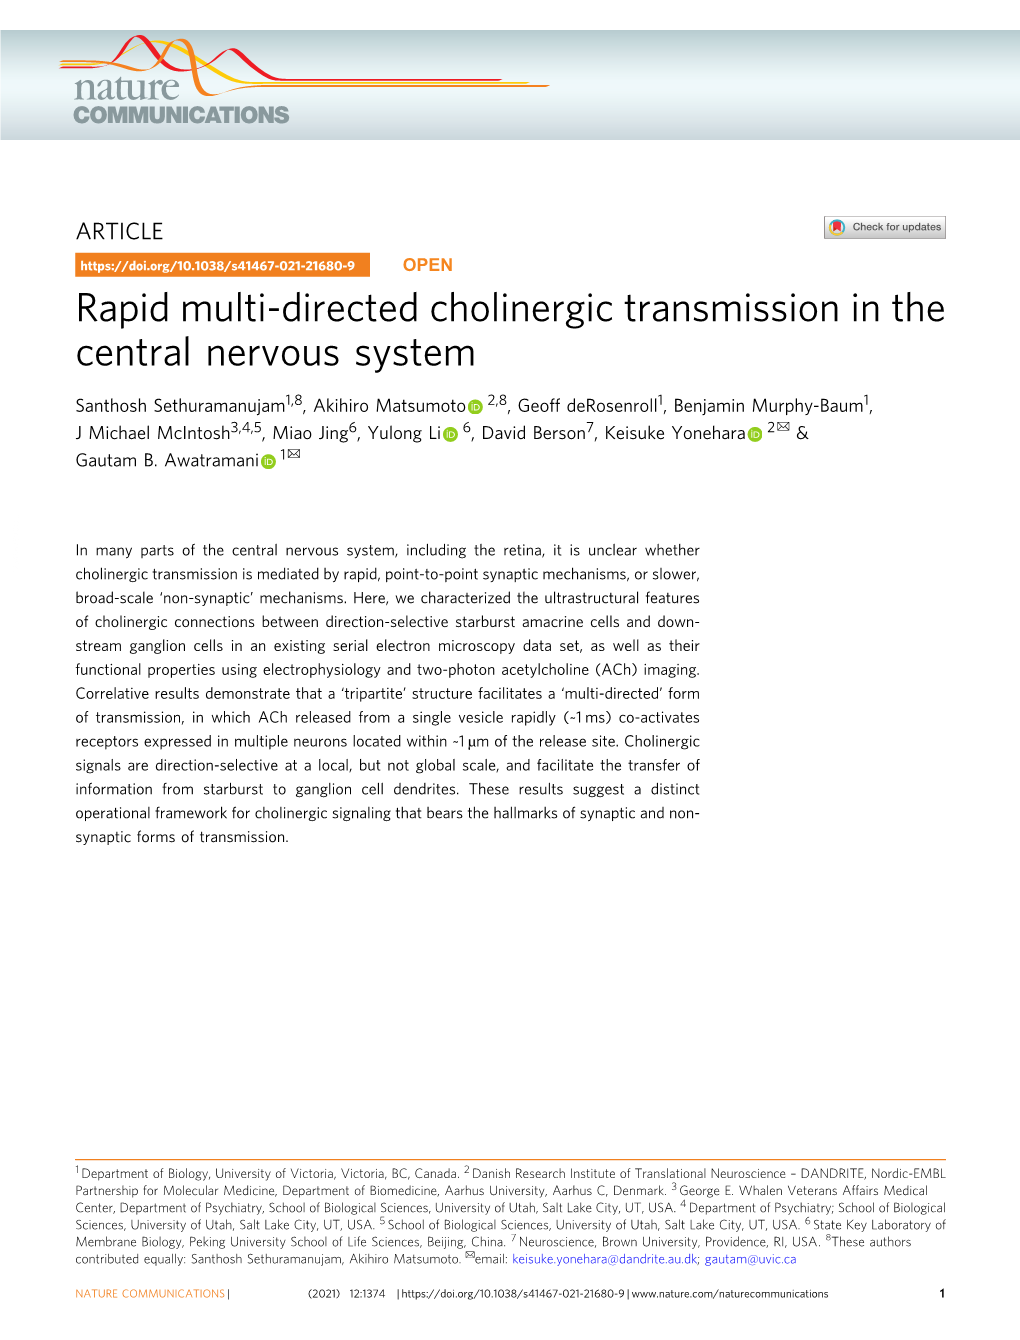 Rapid Multi-Directed Cholinergic Transmission in the Central Nervous System